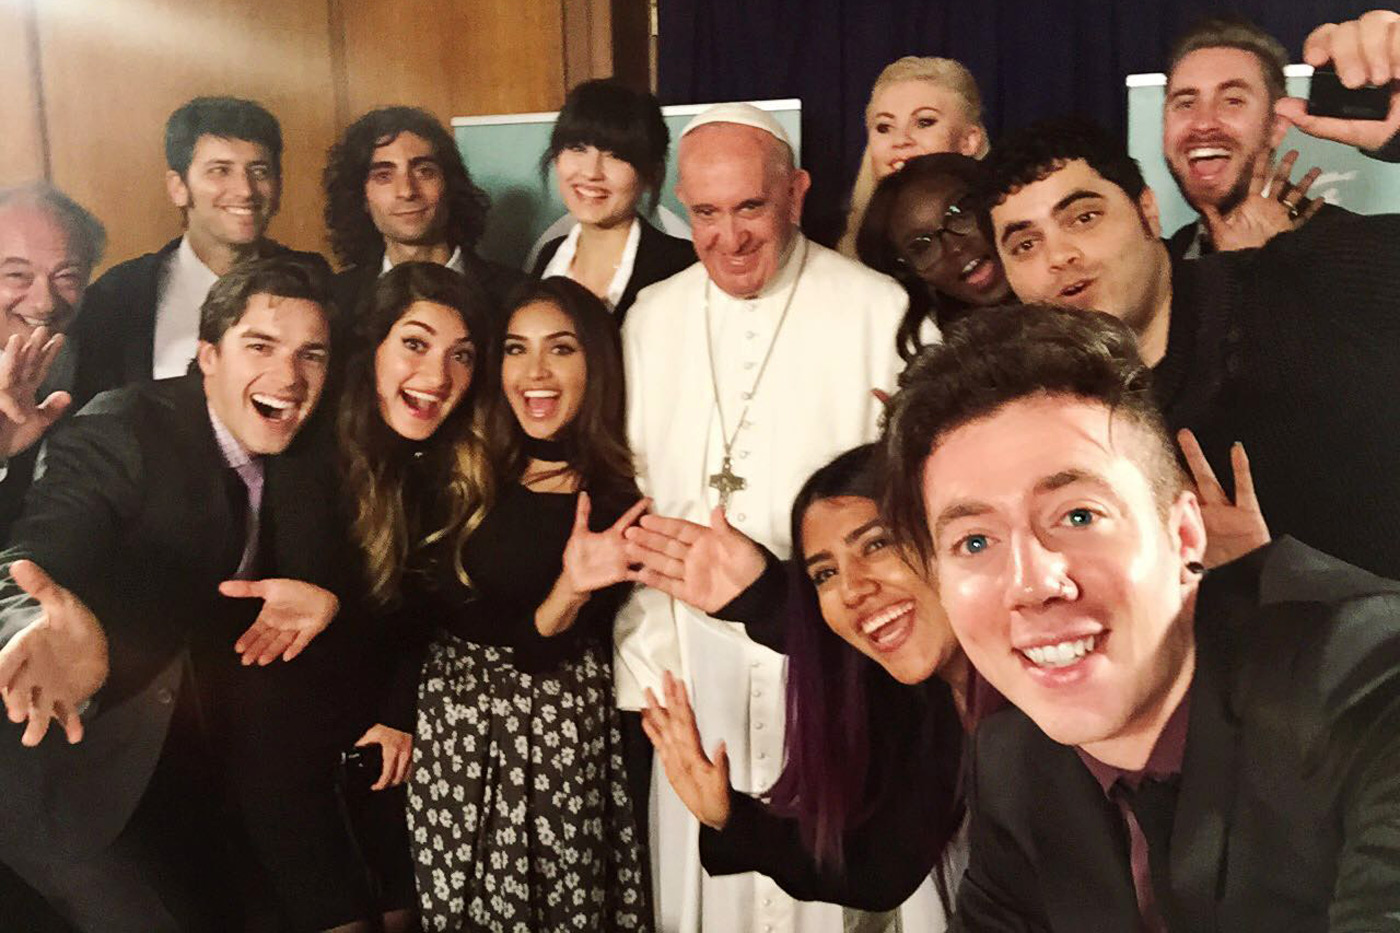 Pope meets YouTube creators from around the world